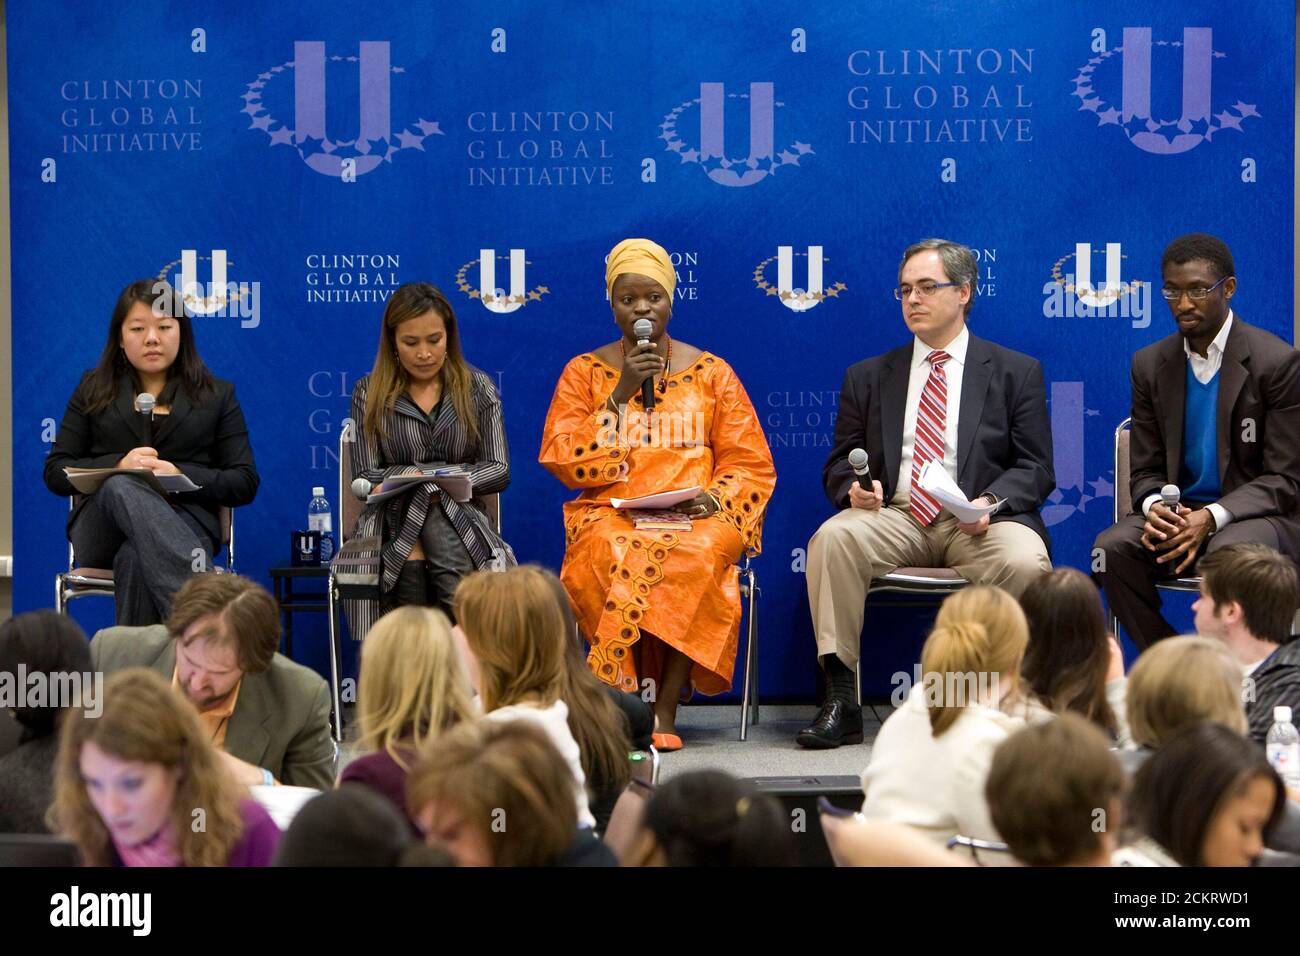 Austin, TX February 14, 2009: Panelists speak during a working session on Peace and Human Rights for Women at the second-annual Clinton Global Initiative University, a conference bringing together students to take action on global challenges such as poverty, hunger, energy, climate change and global health. The program is patterned after Clinton Global Initiative Foundation formed by President Bill Clinton. ©Bob Daemmrich Stock Photo